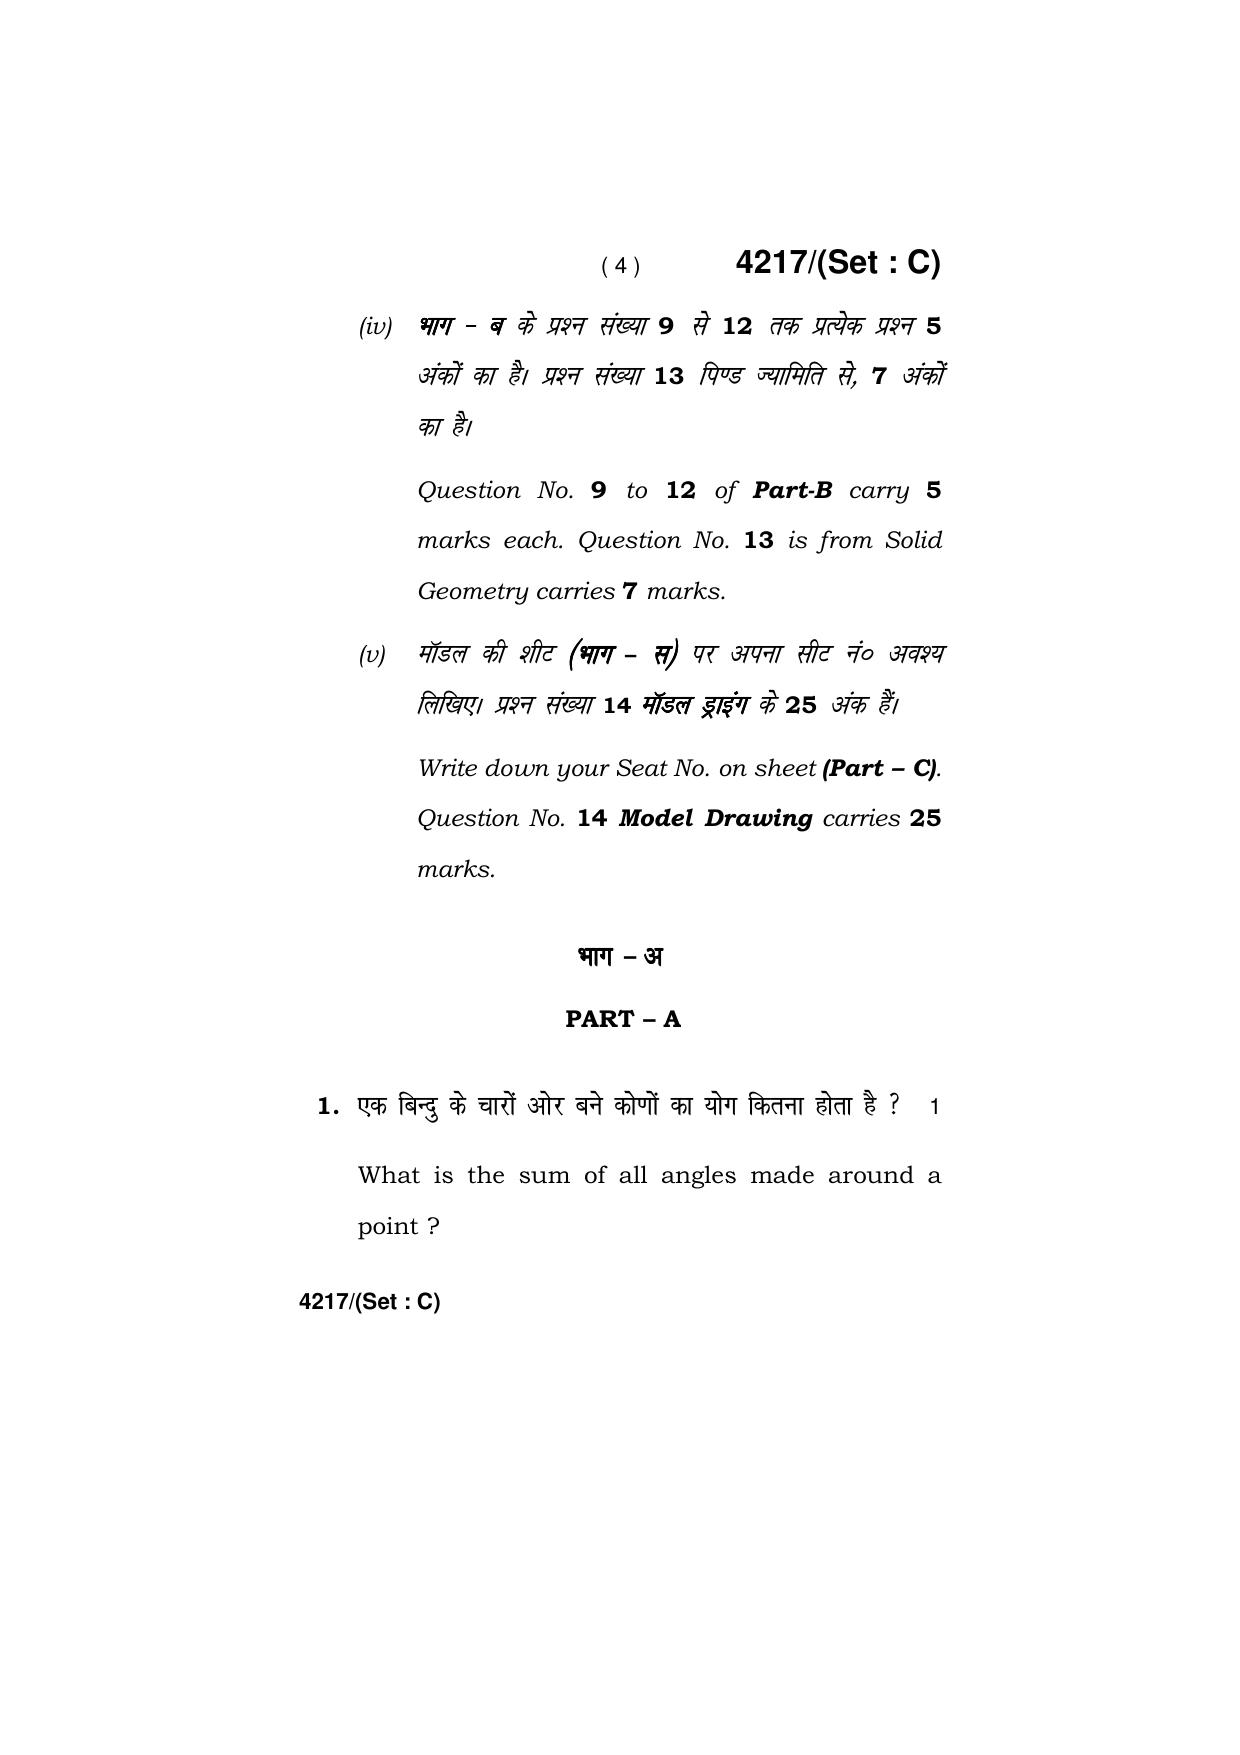 Haryana Board HBSE Class 10 Drawing (All Set) 2019 Question Paper - Page 20